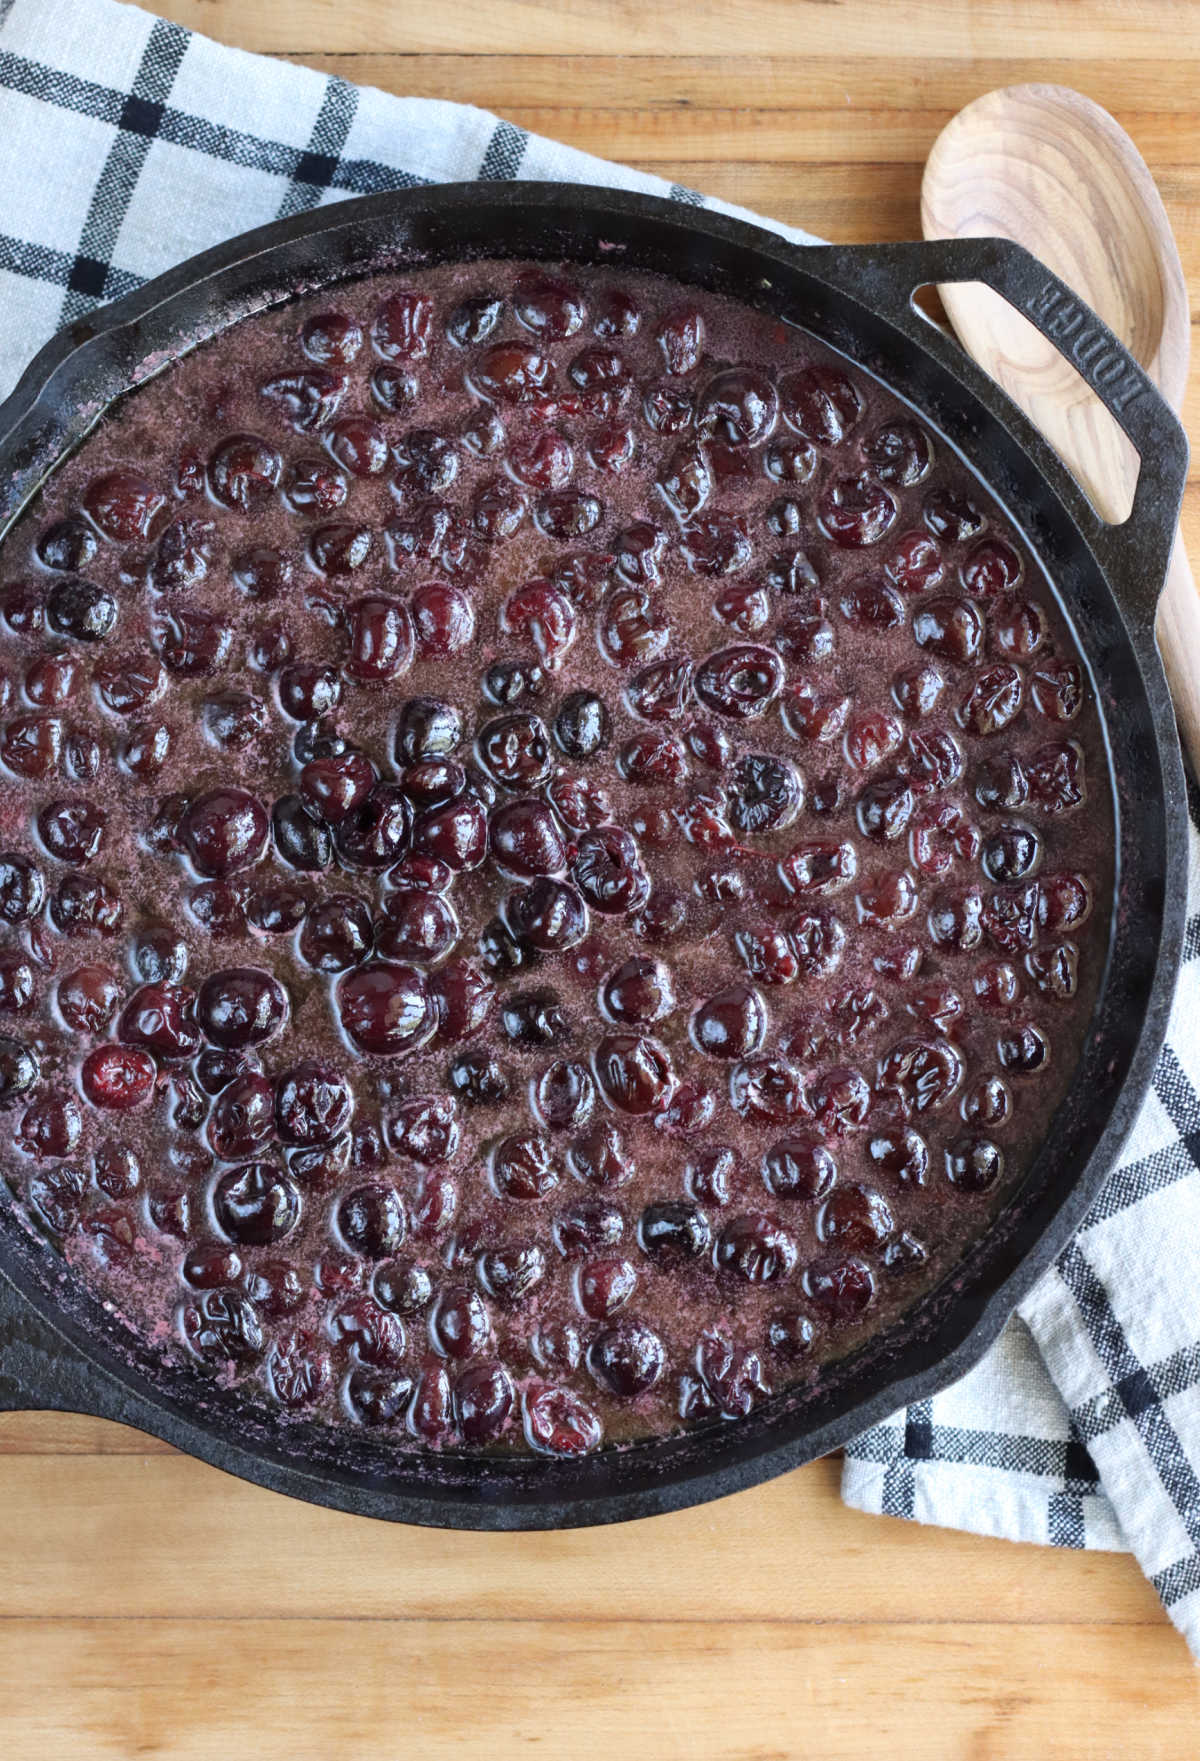 Cherry pie filling in large cast iron skillet on wooden cutting board,